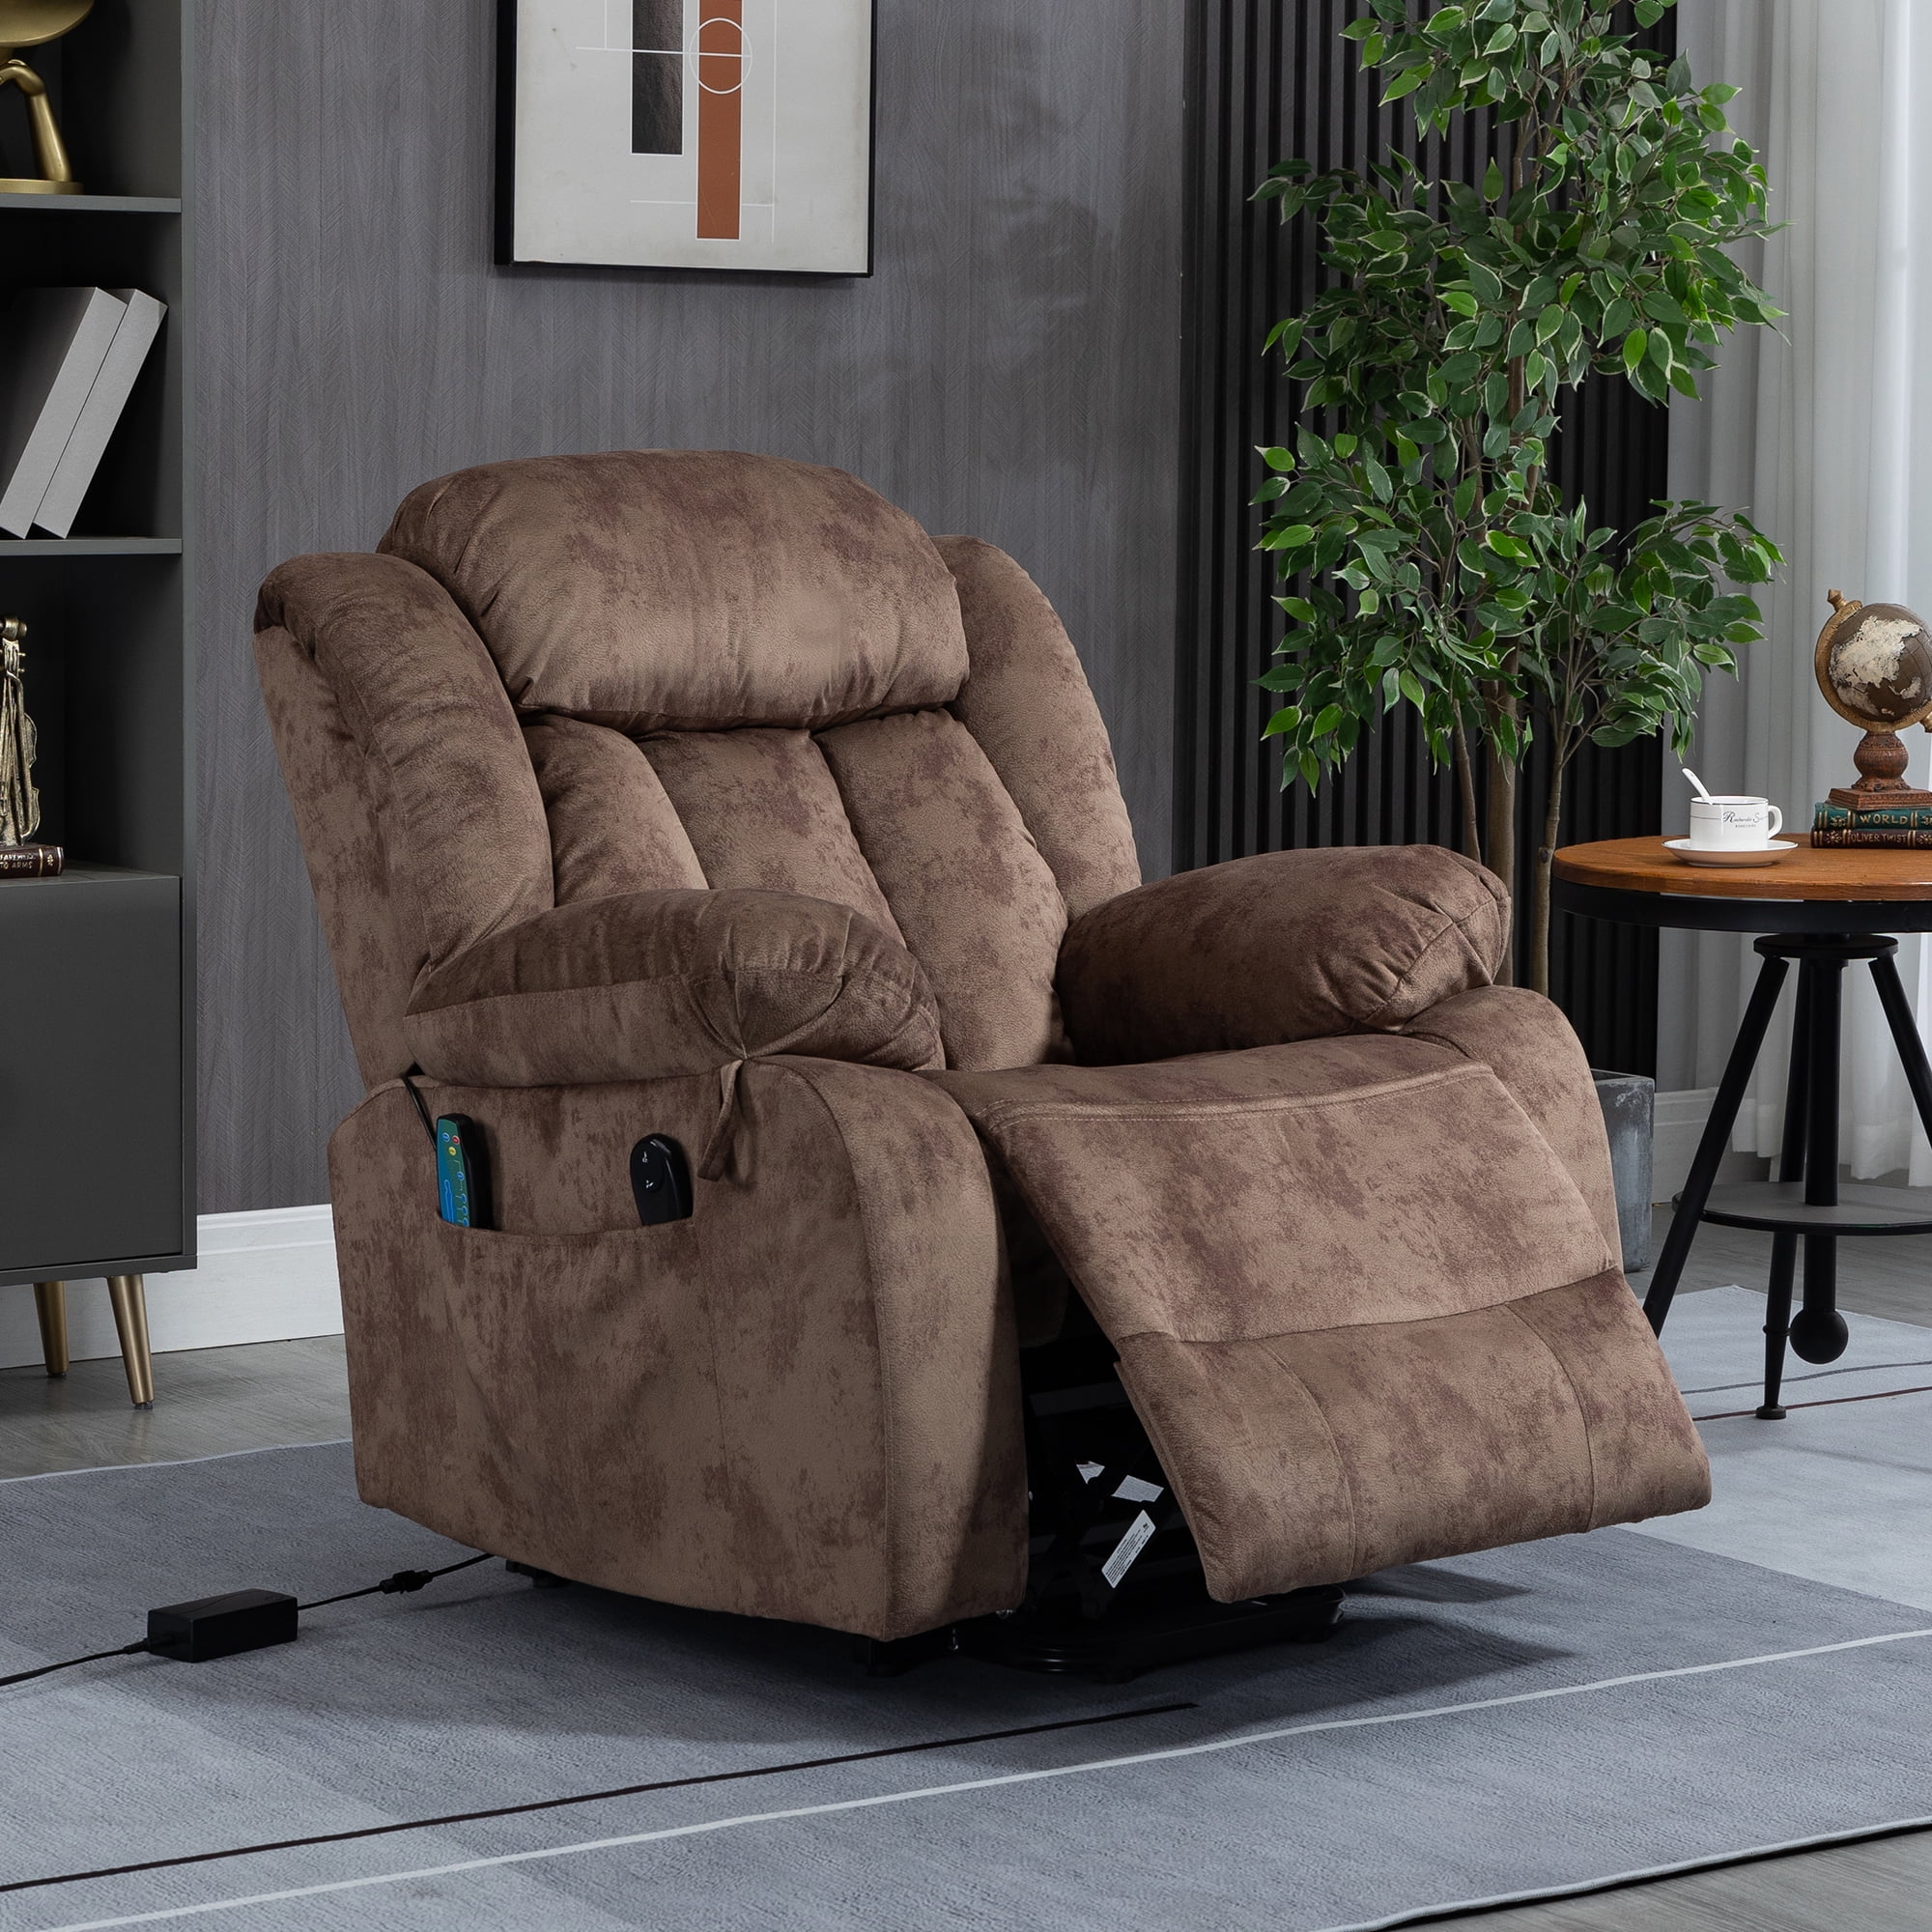 Uhomepro Large Massage Recliner Chair, Velvet Electric Heated Power Lift Recliner Chairs for Adults Oversize, Recliner Sofa 400 lb Capacity with 5